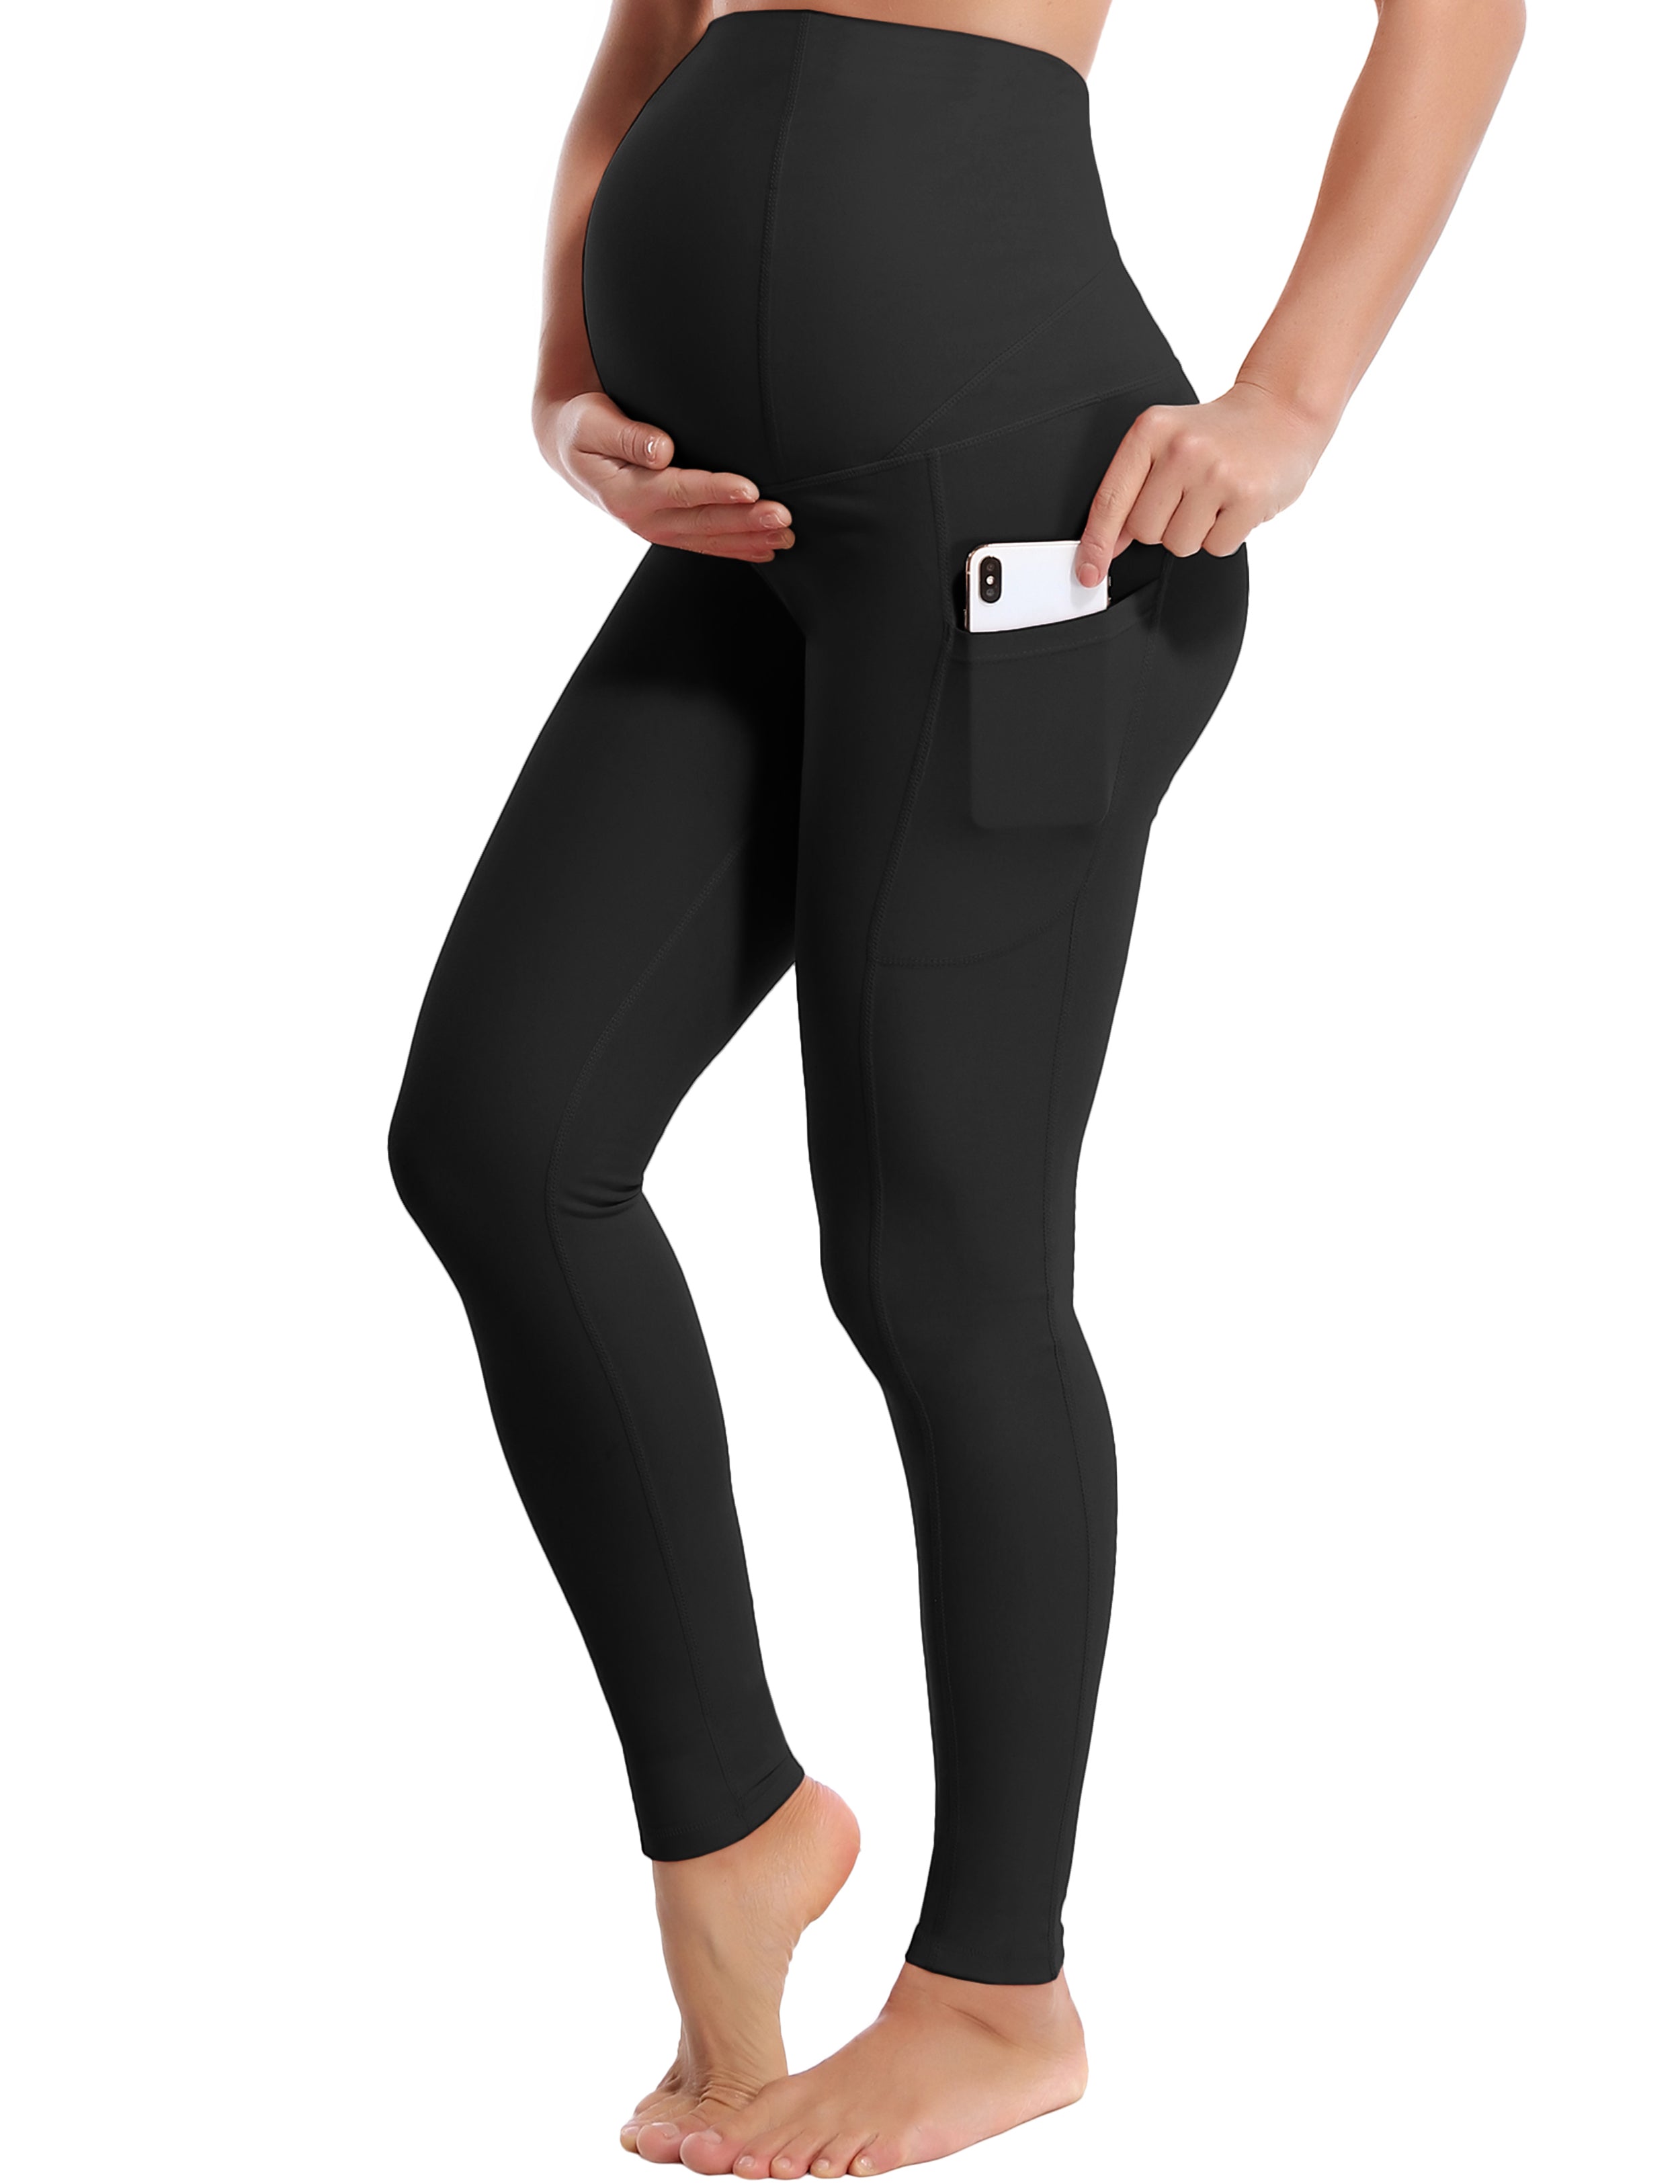 26" Side Pockets Maternity Biking Pants black 87%Nylon/13%Spandex Softest-ever fabric High elasticity 4-way stretch Fabric doesn't attract lint easily No see-through Moisture-wicking Machine wash